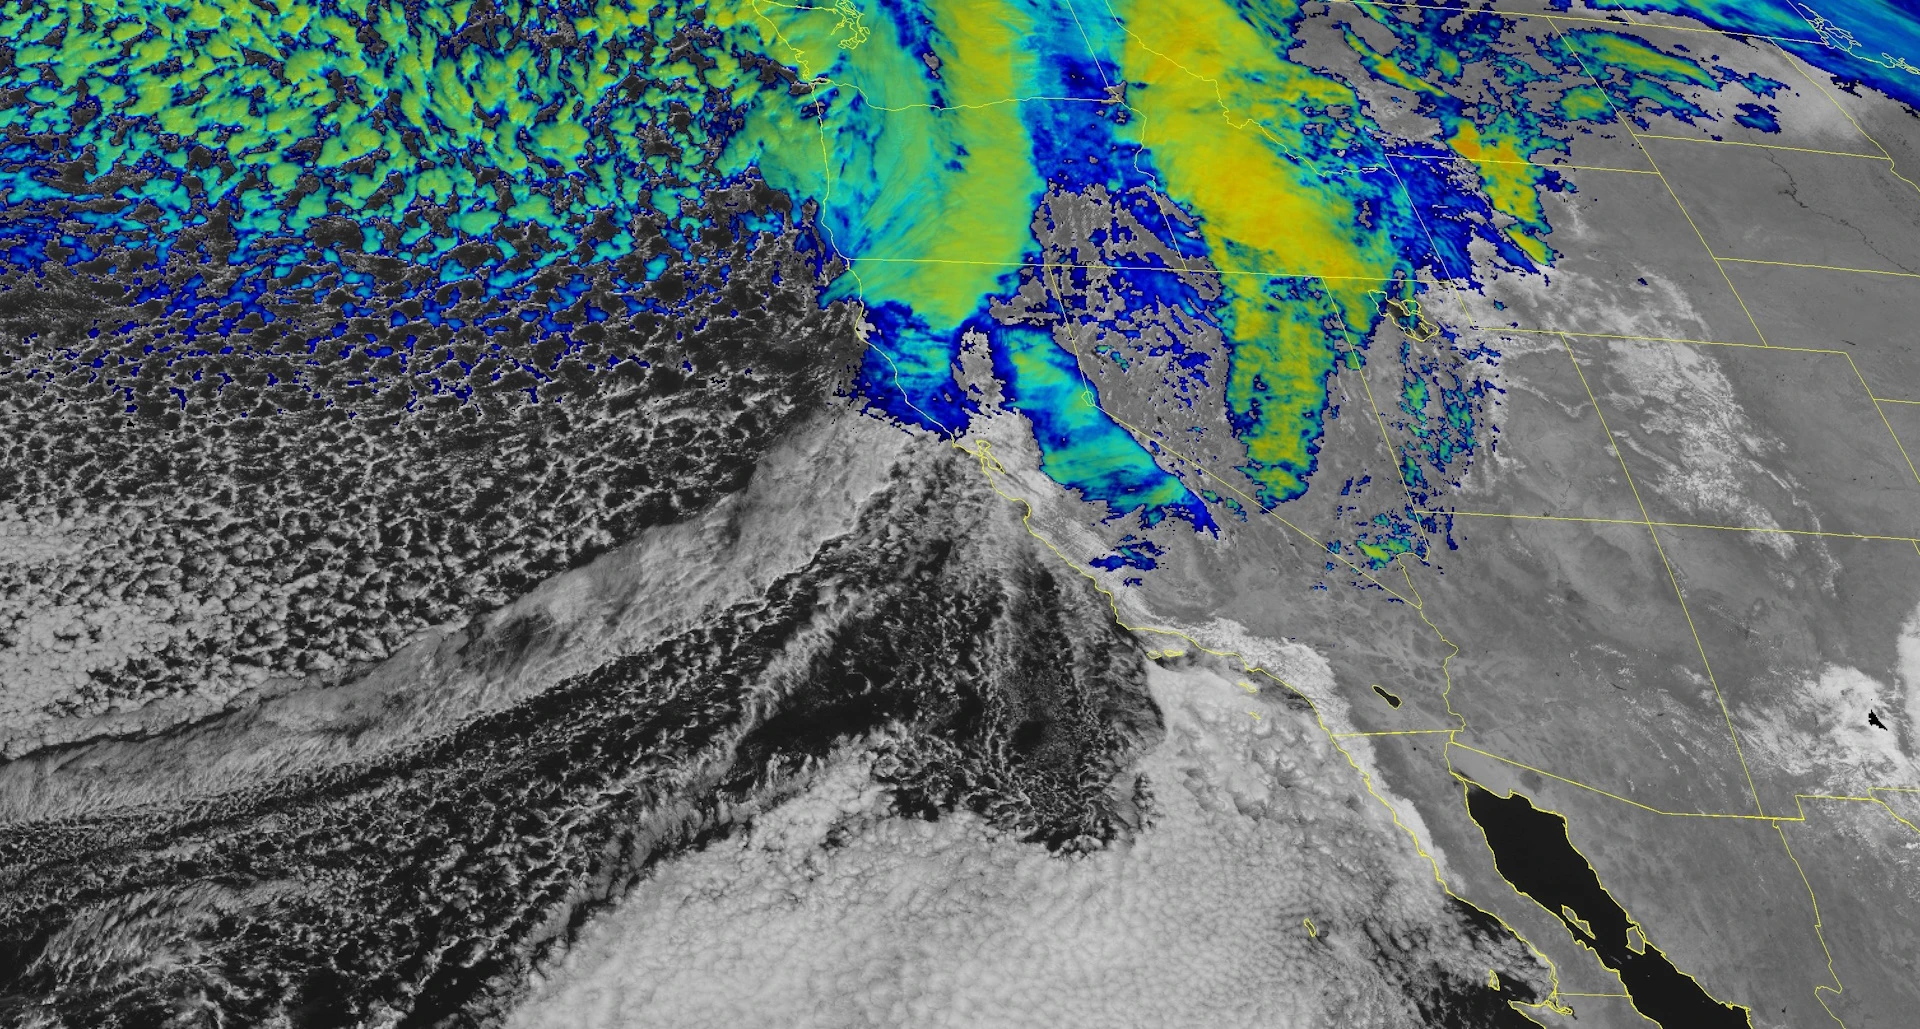 Tremendous wind-whipped snows to blanket California mountains